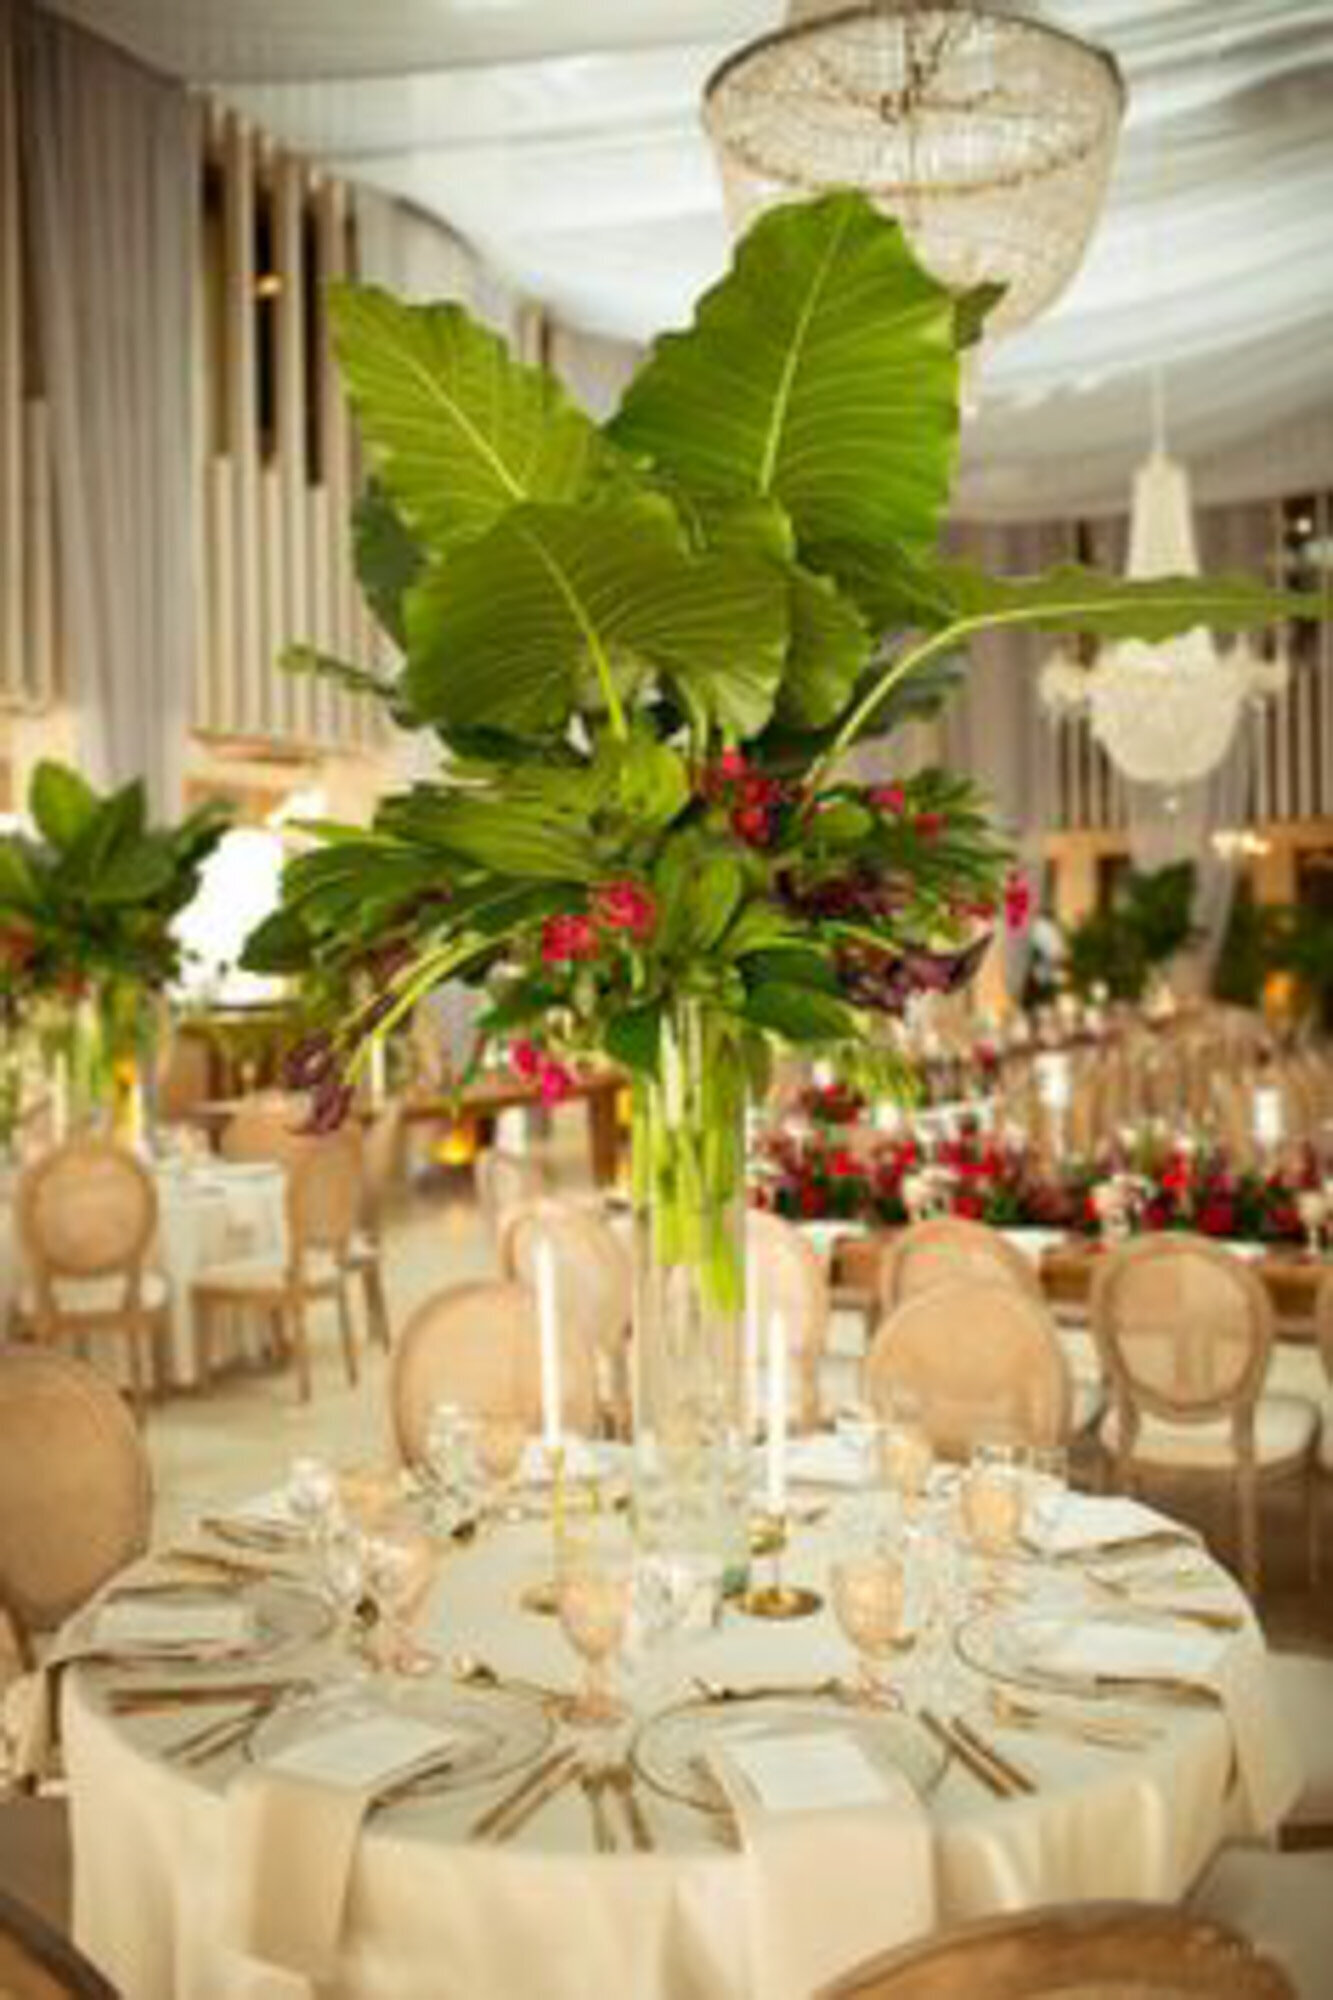 Wedding reception table with dinnerwares and chairs and has tropical themed floral centerpieces